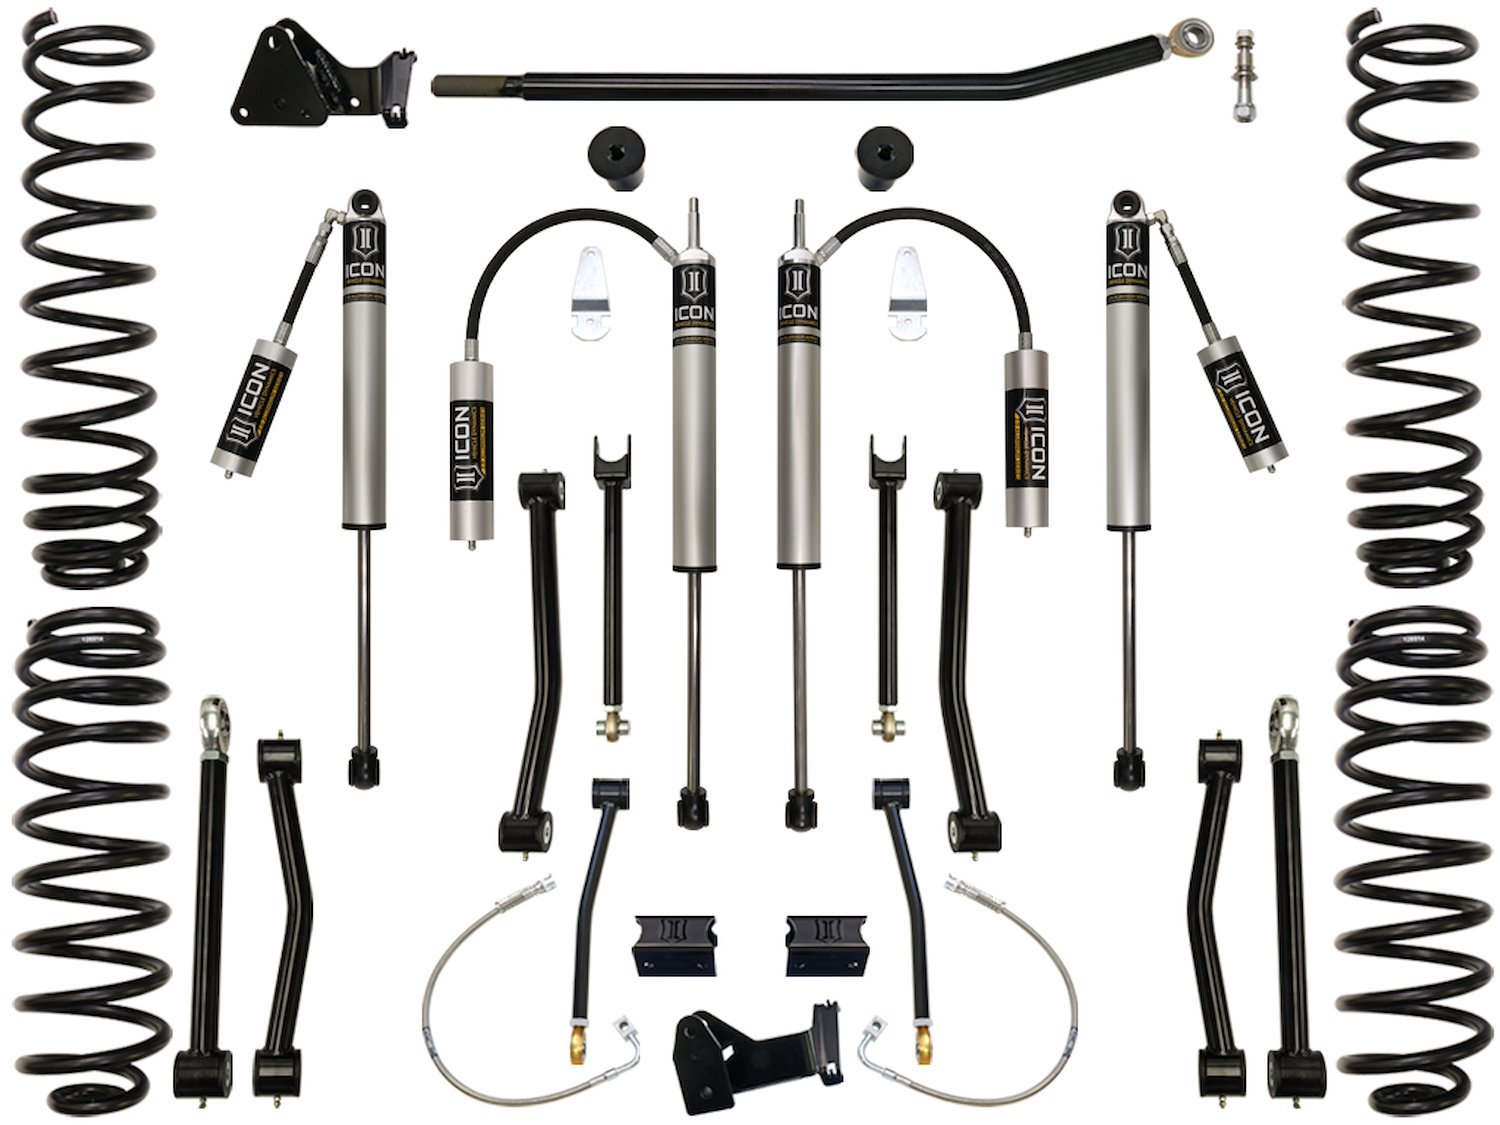 K24002 Front and Rear Suspension Lift Kit, Lift Amount: 4.5 in. Front/4.5 in. Rear